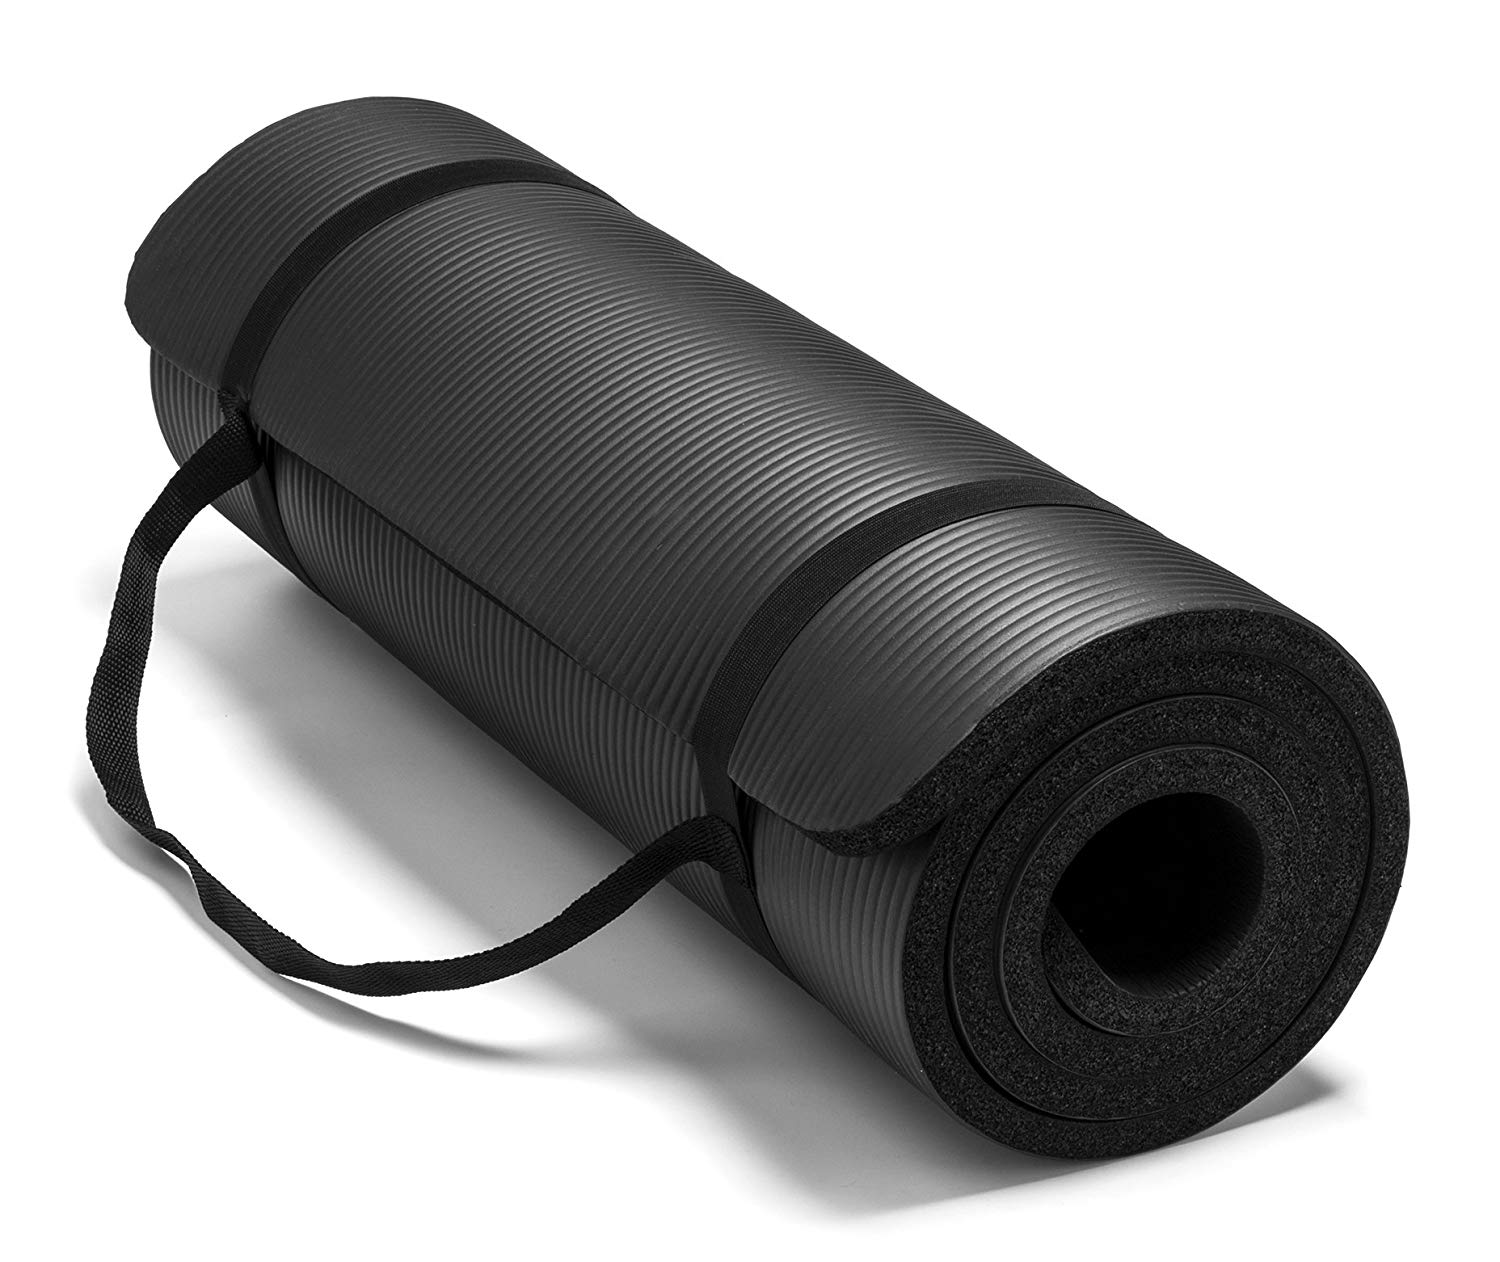 Sol Yoga Mat 12mm Thick NBR Yoga Mat with Free Carry Strap